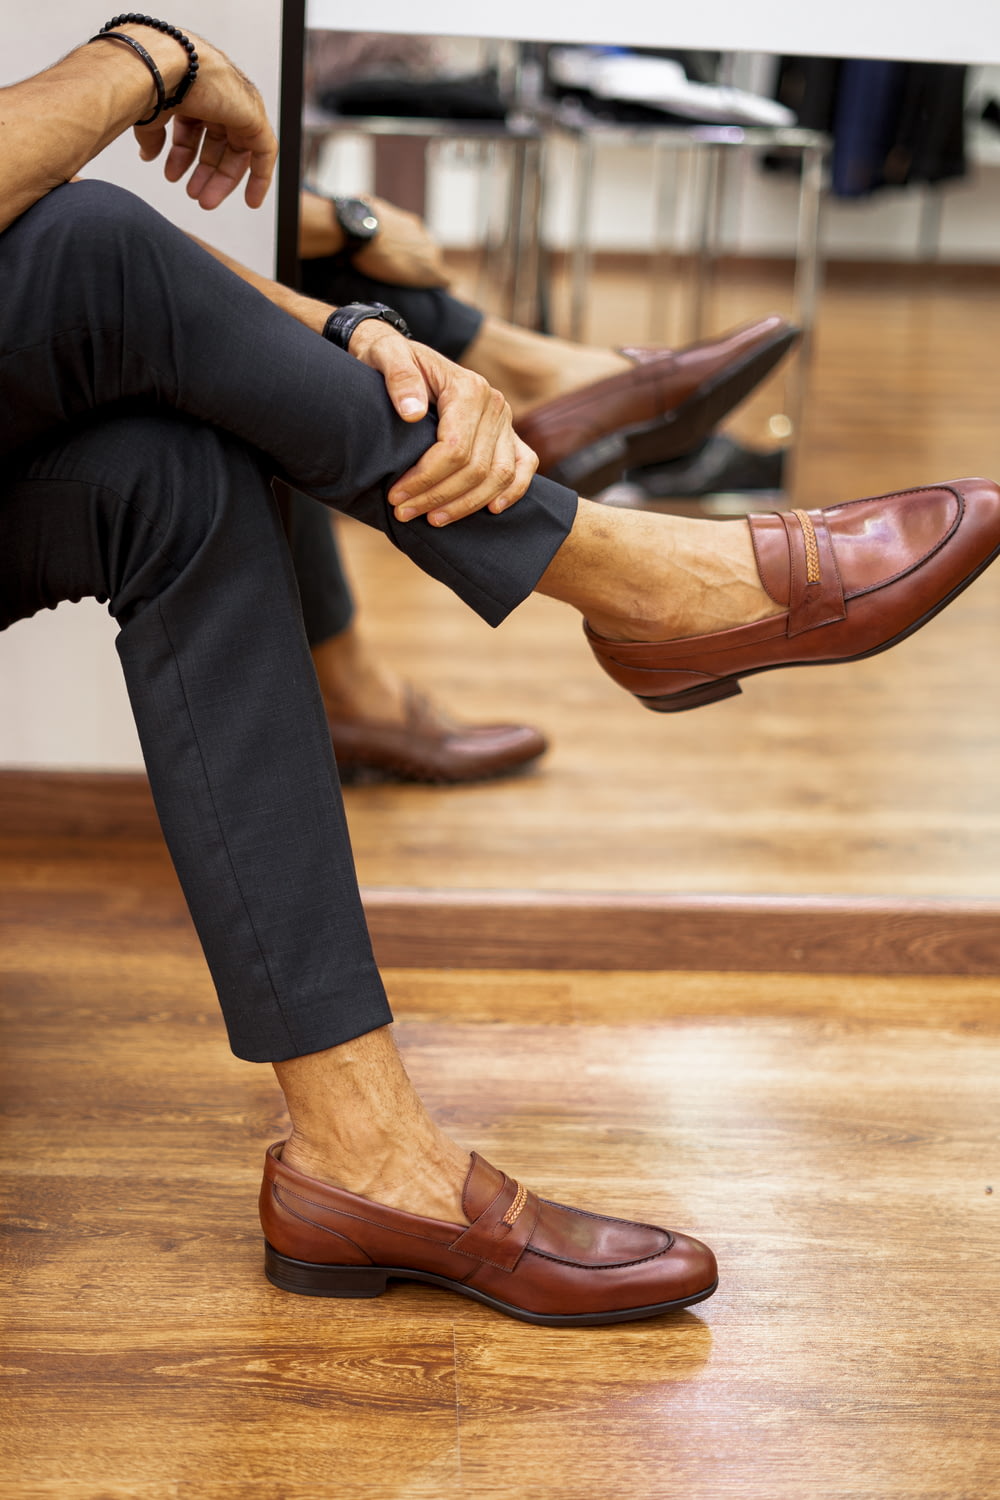 a pair of men's shoes sitting on a wooden floor